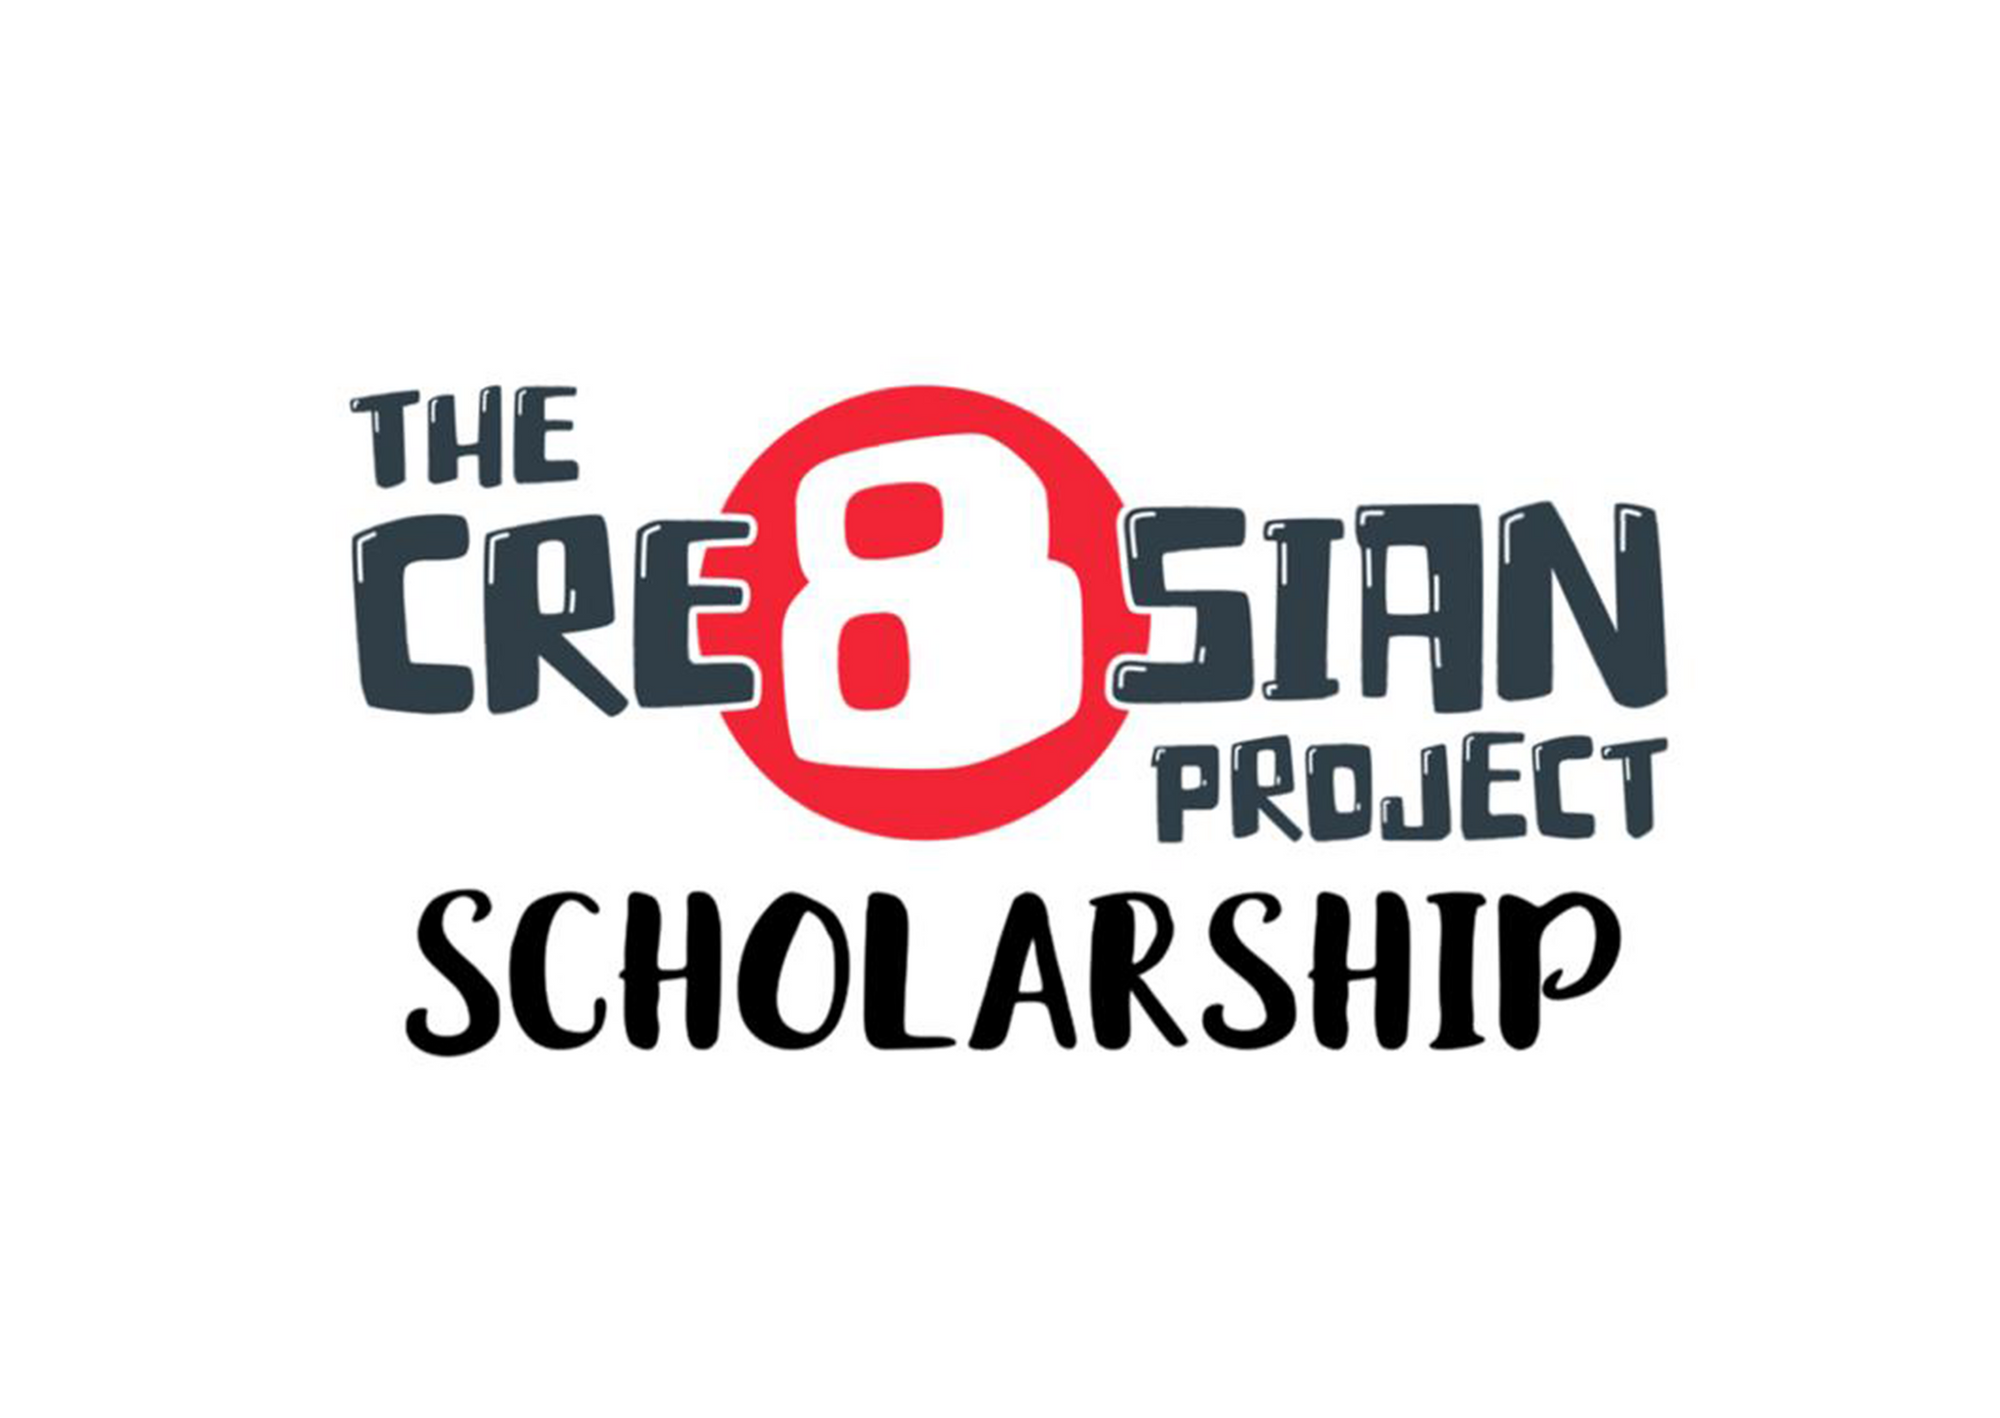 Announcing The Cre8sian Project Scholarship for the 2020-2021 School Year!